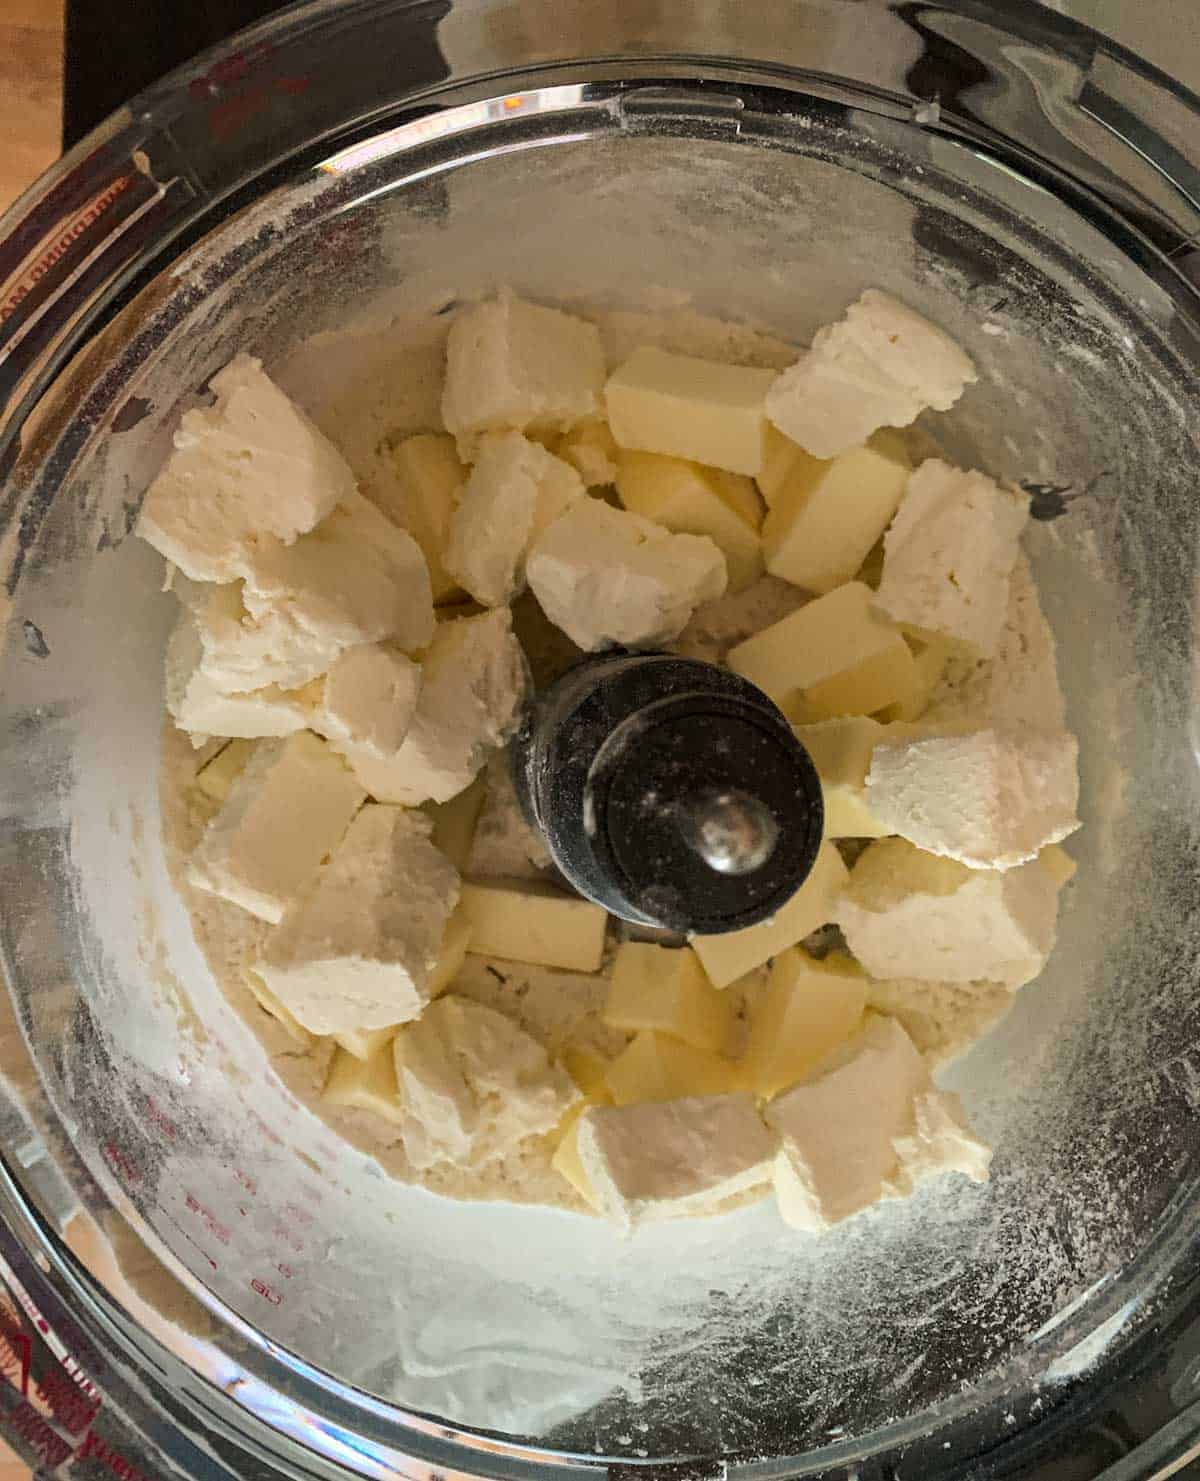 Flour mixture, slices of butter, and cream cheese pieces in a food processer bowl.